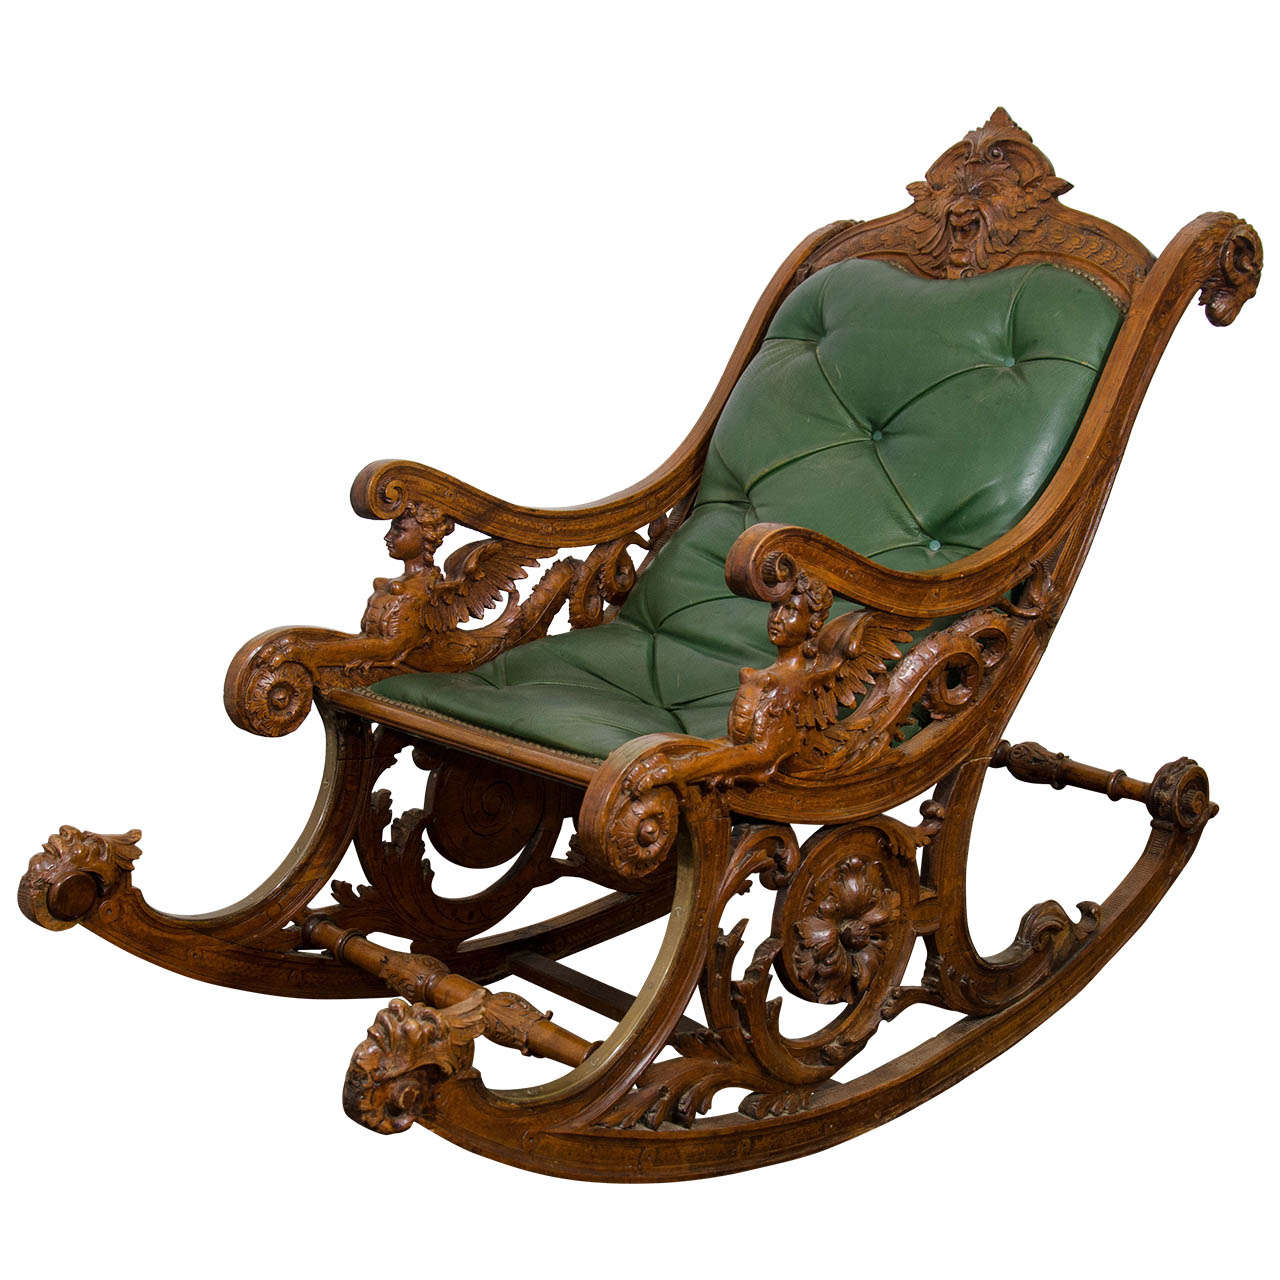 Carved Italian Rocking Chair, Antique Wooden Rocking Chair With Leather Seat